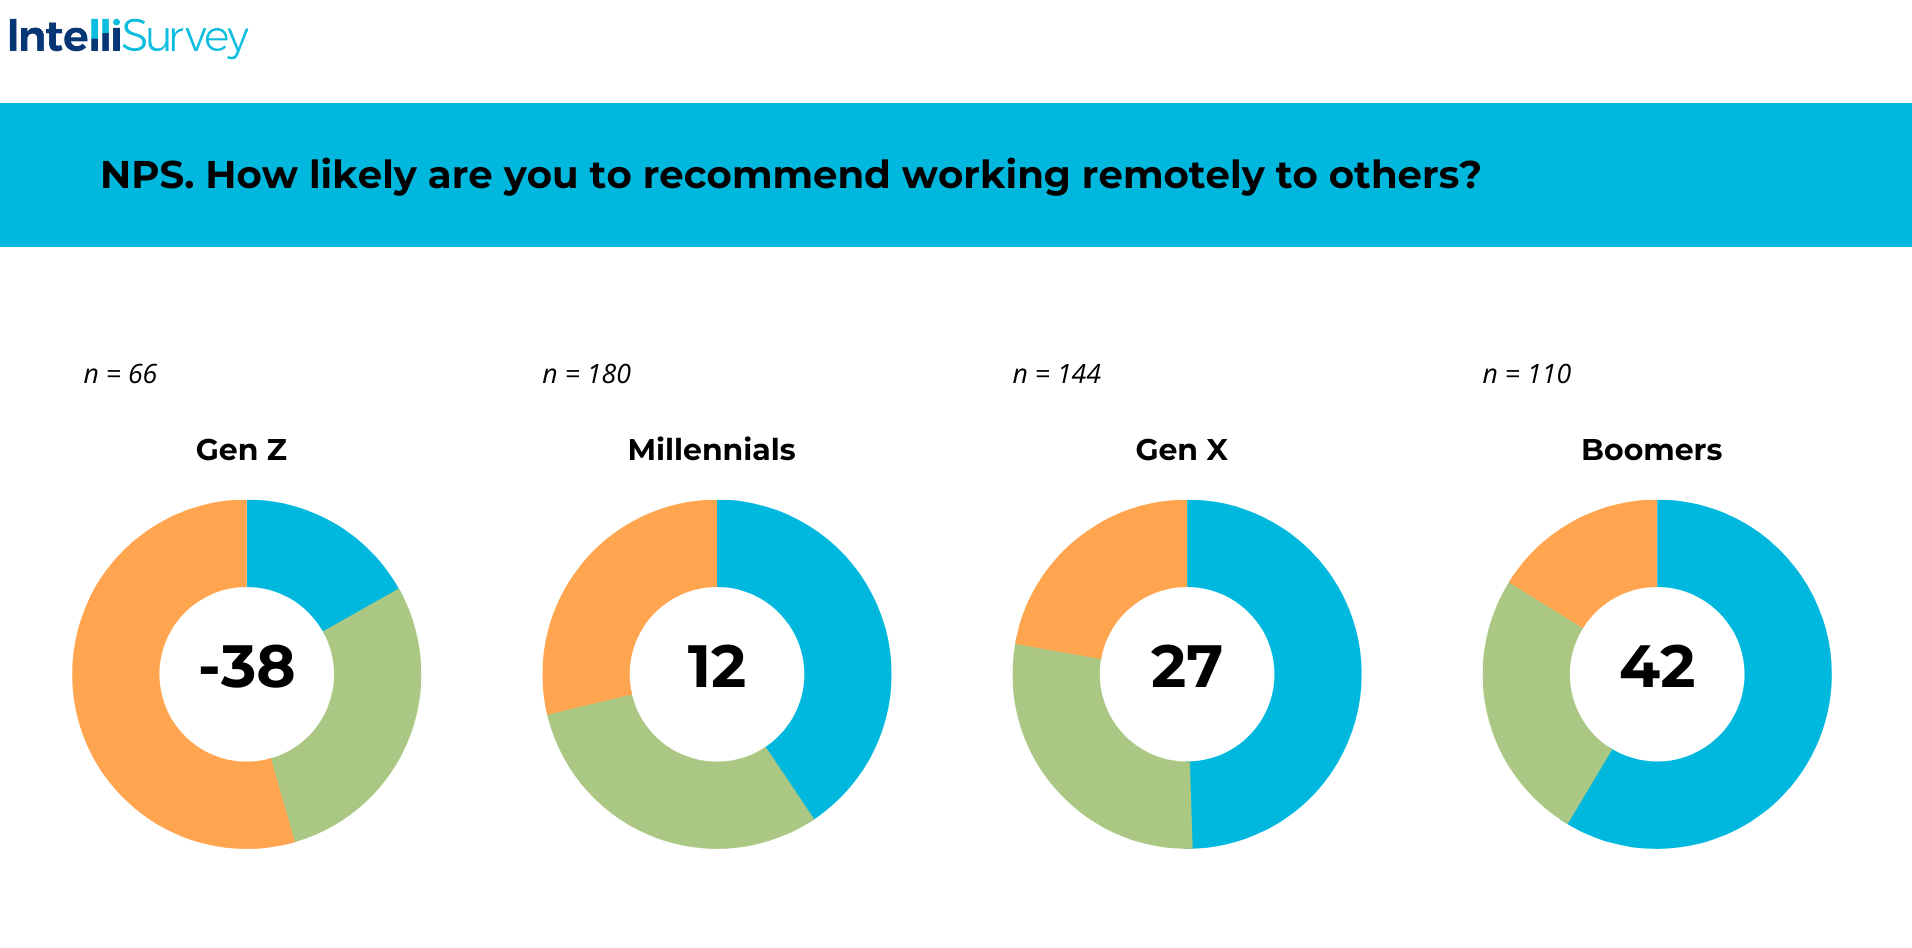 NPS chart of the likeliness to recommend working remotely from different generations